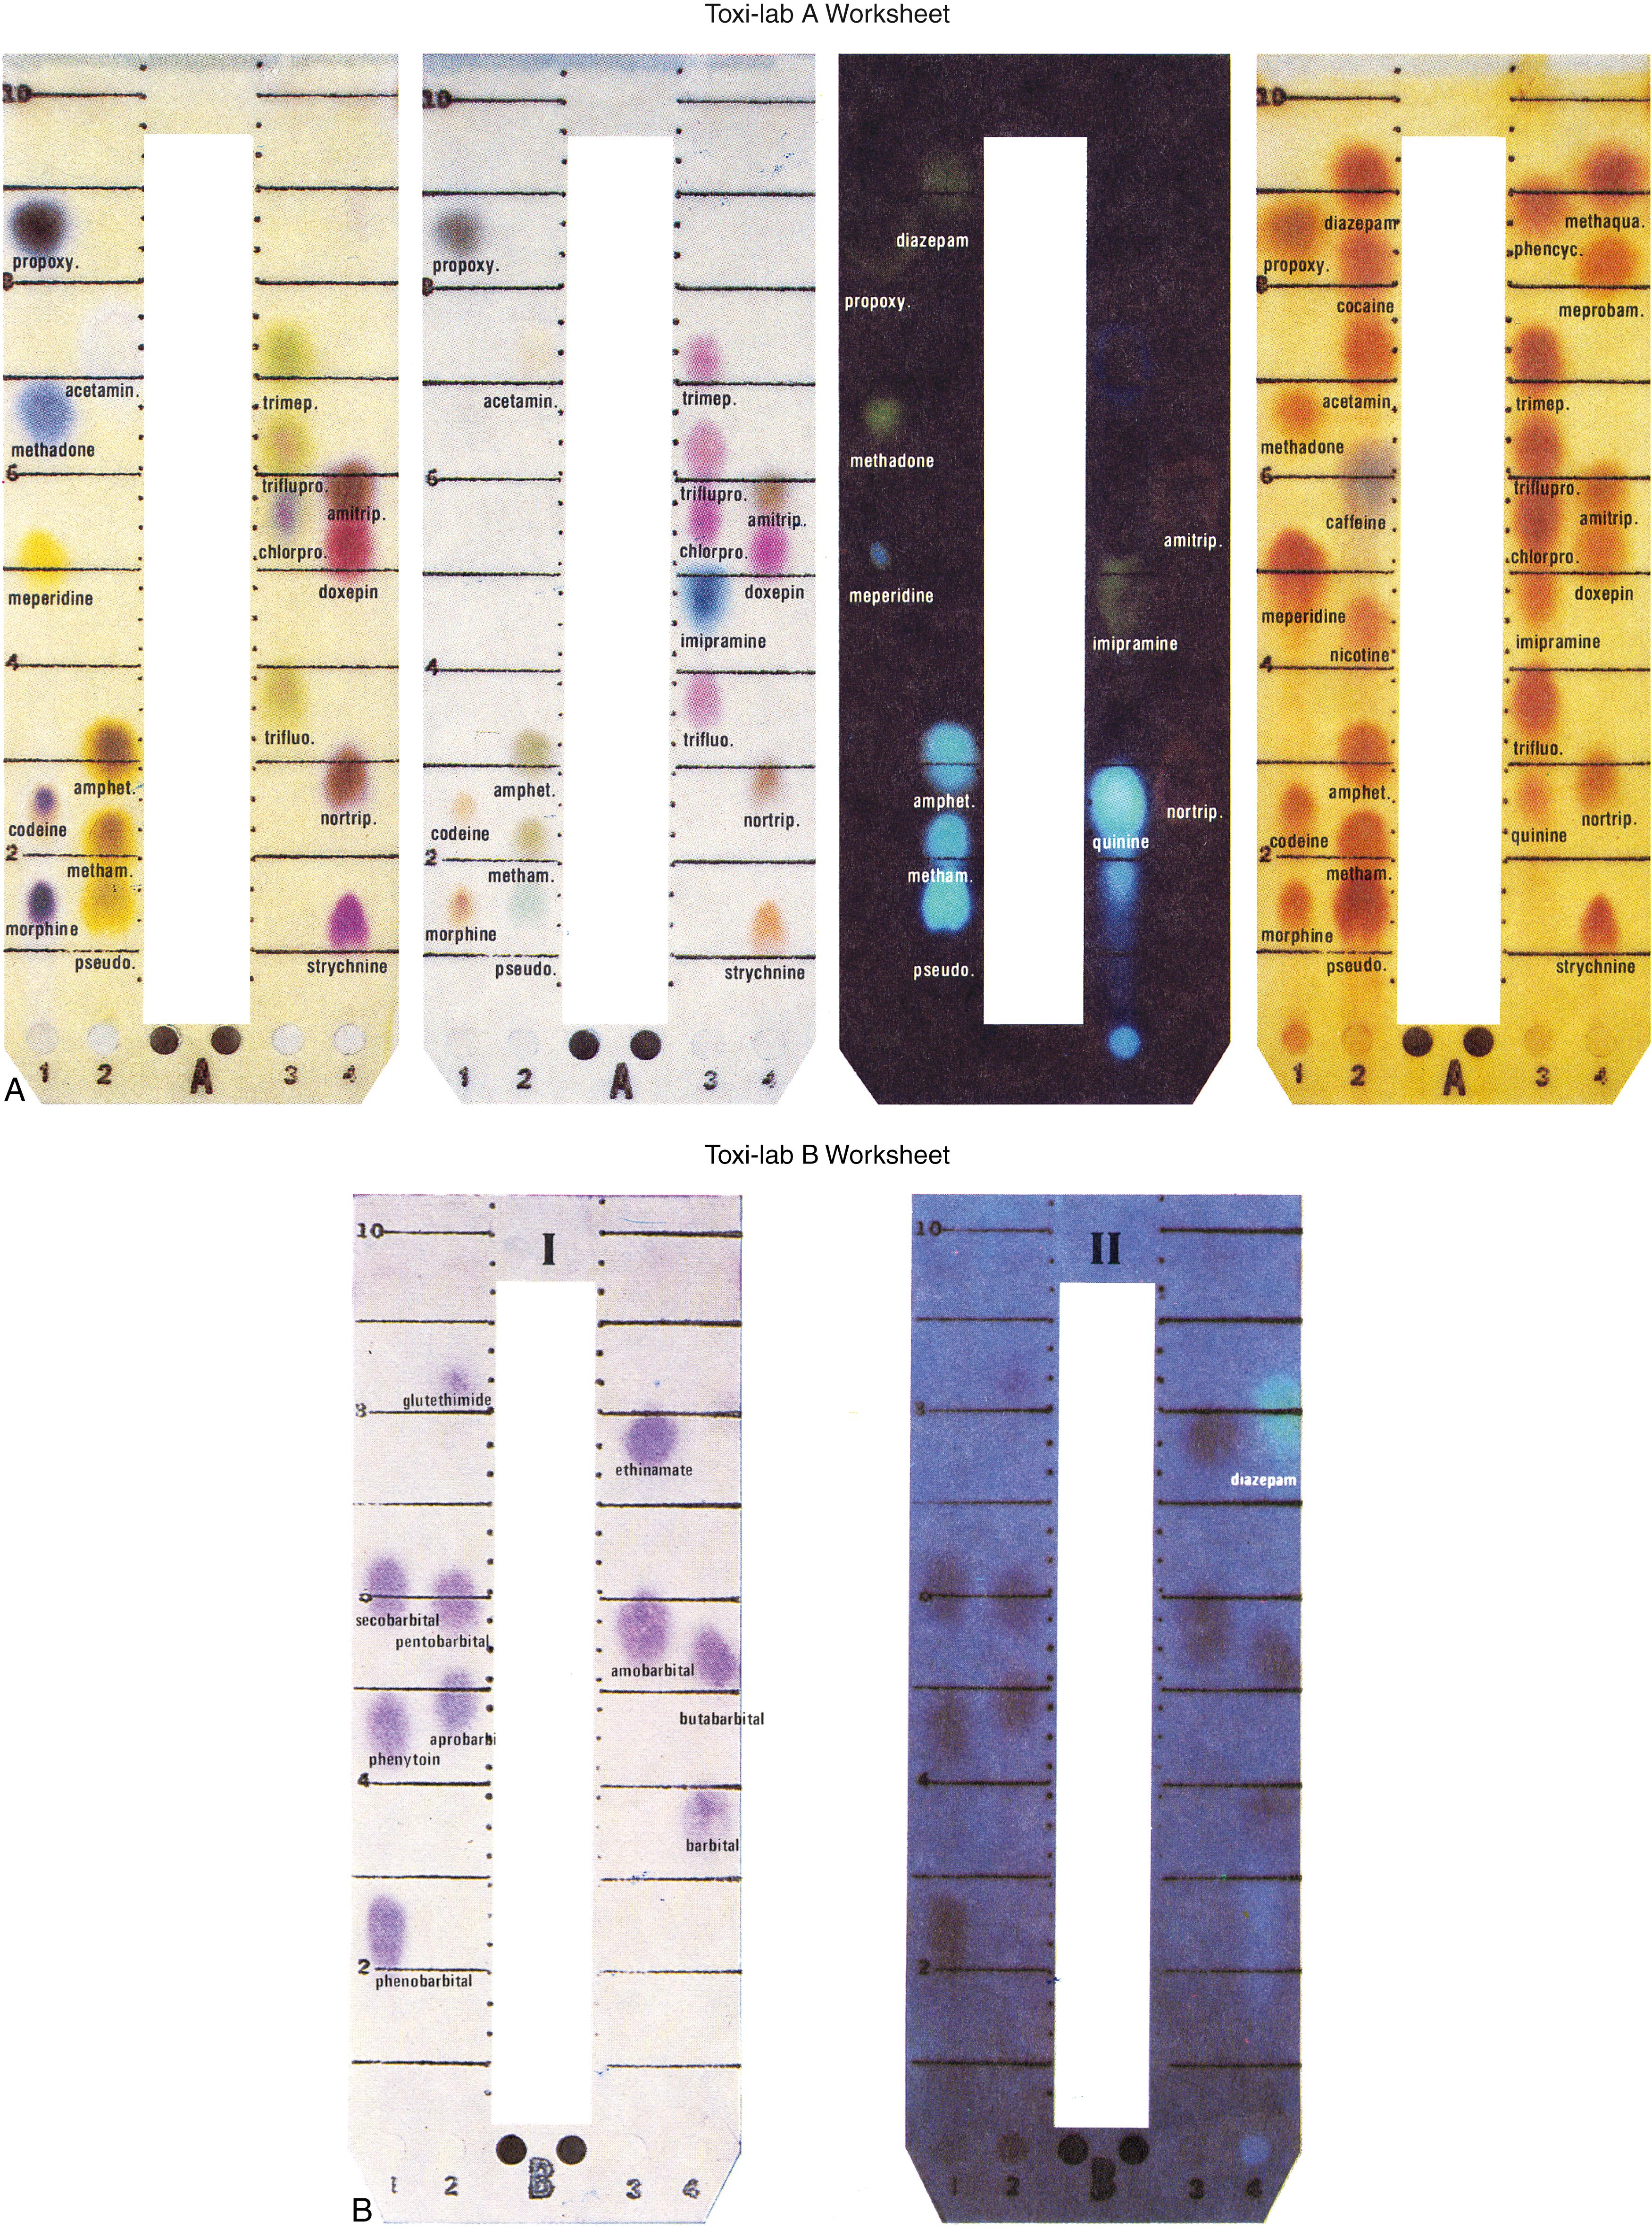 Figure 24.3, A set of typical separations of the major drugs of abuse (and some therapeutic drugs) on Toxi-Lab thin-layer chromatography. Toxi-Lab A worksheet: Typical separation of basic drugs on the A strip, together with characteristic color changes. The third Toxi-Lab A strip shows characteristic fluorescence of different drugs. Note that amphetamine and methamphetamine on the lower left are both fluorescent. Toxi-Lab B worksheet: Left: Typical separation of the more acidic drugs on the B strip with characteristic color changes. The major use of the B strip is to identify the presence of barbiturates. Right: Fluorescence patterns of drugs on the B strip.